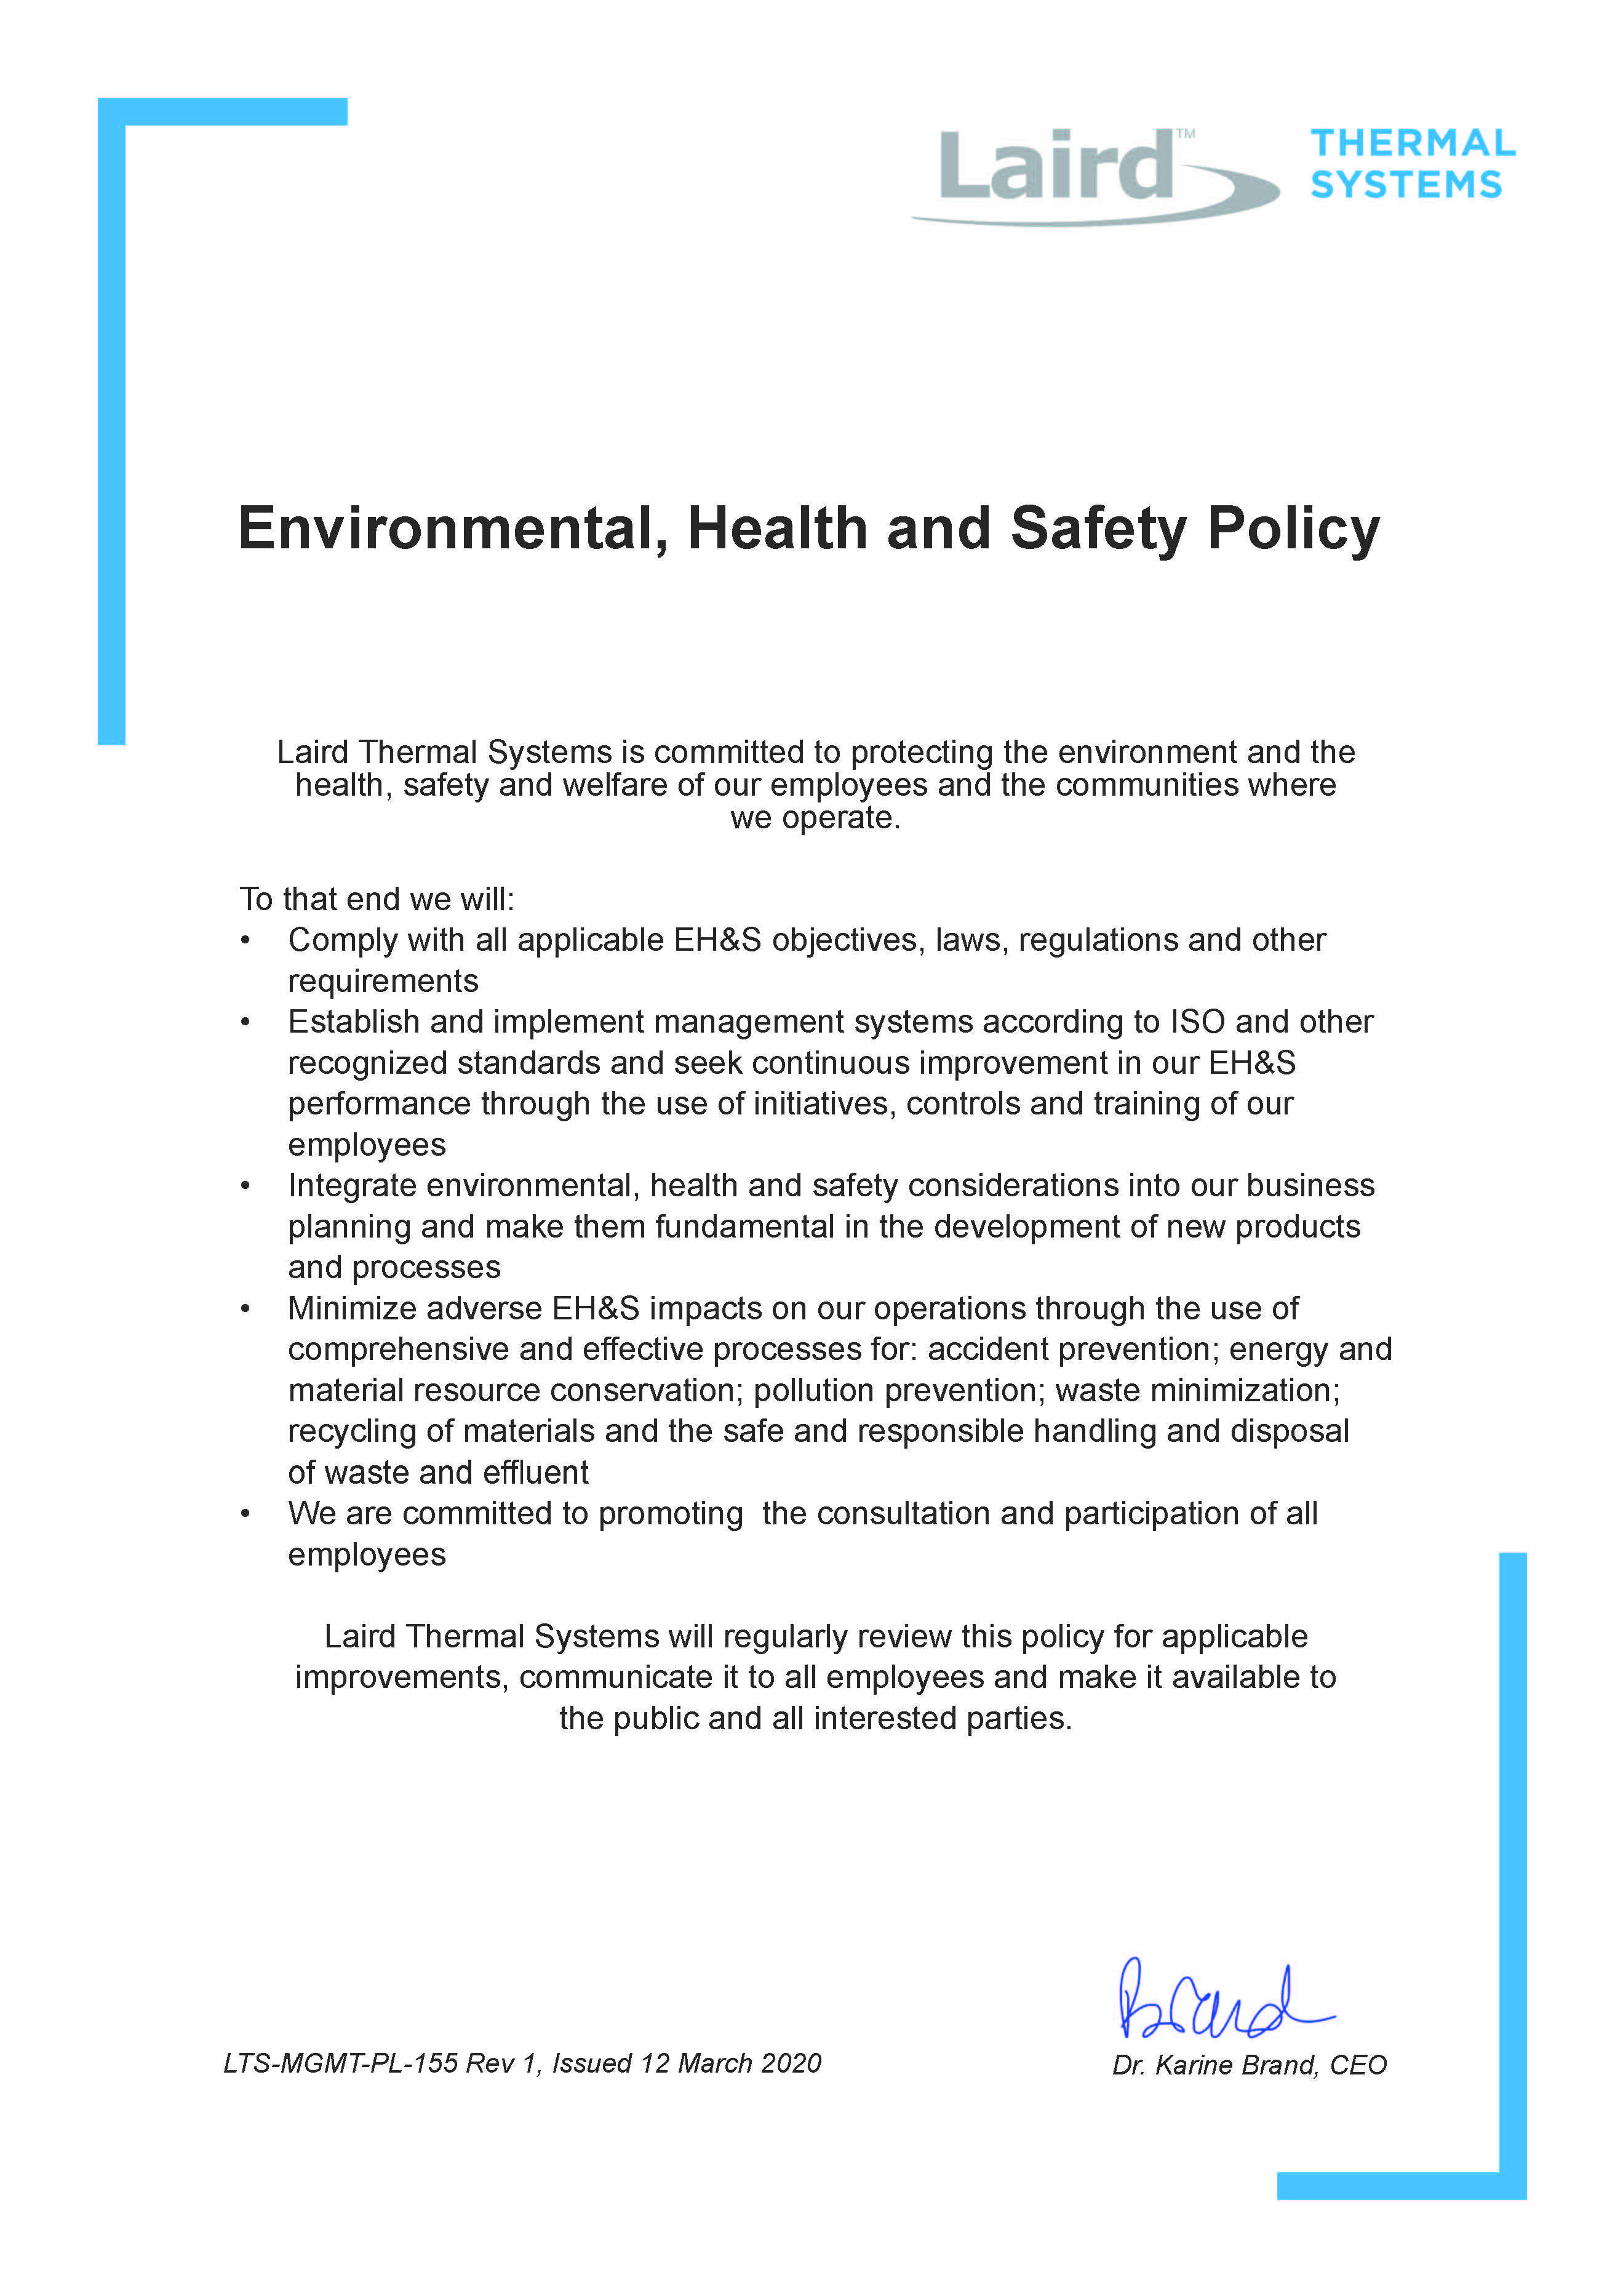 Environmental-Health-and-Safety-Policy-image